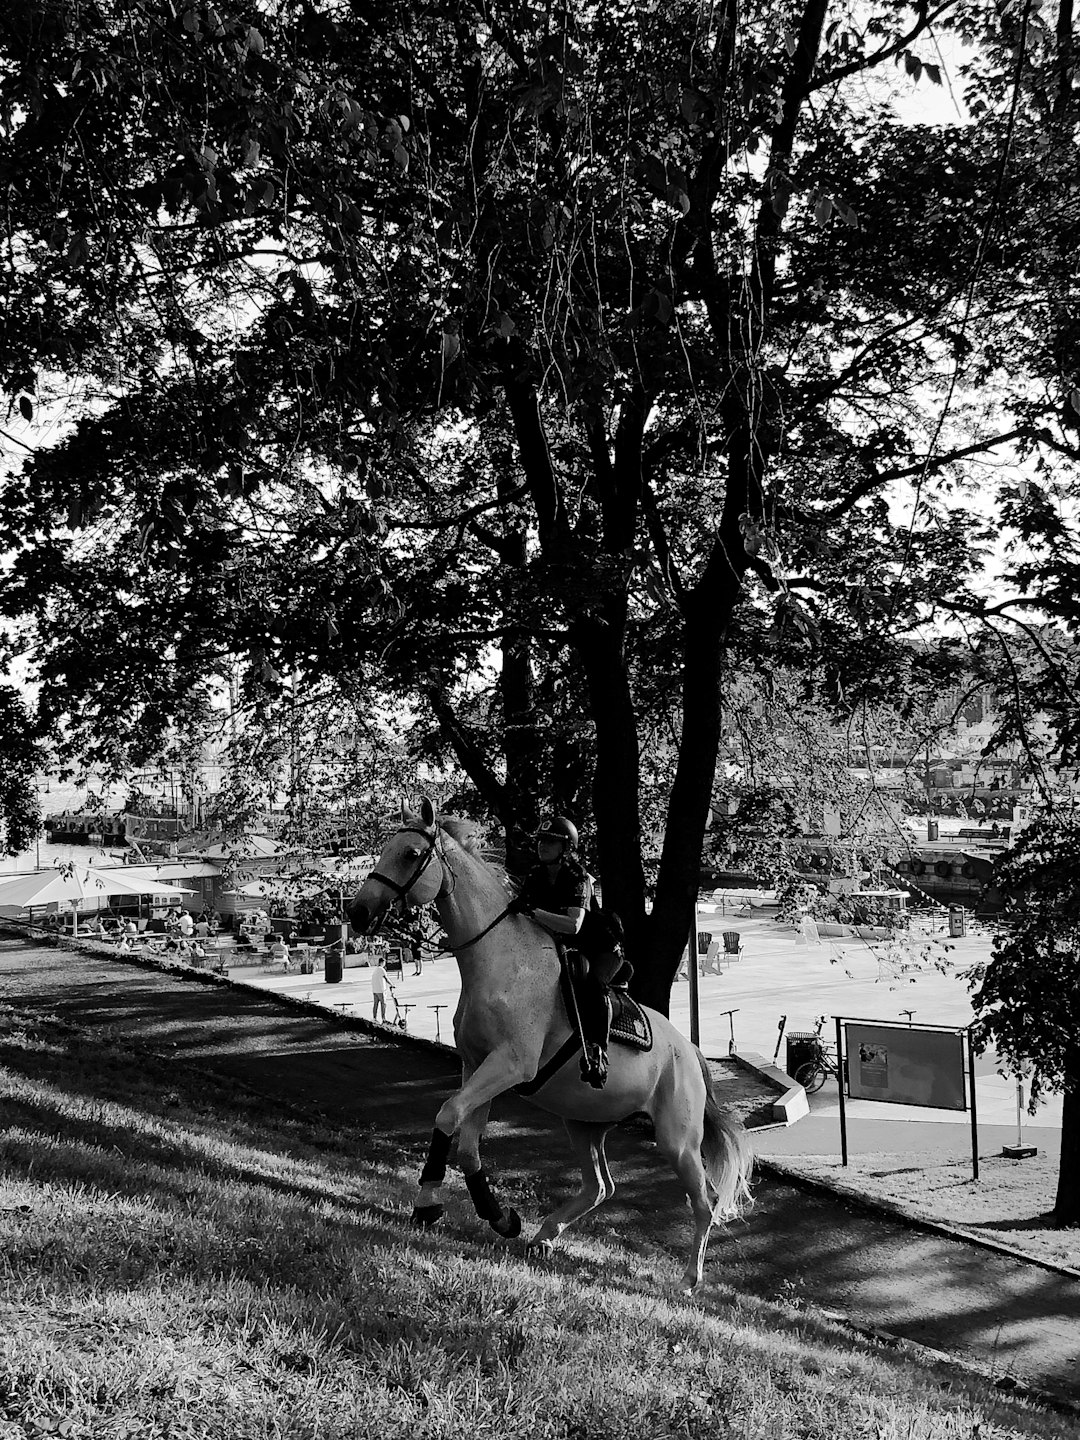 grayscale photo of man riding horse on road